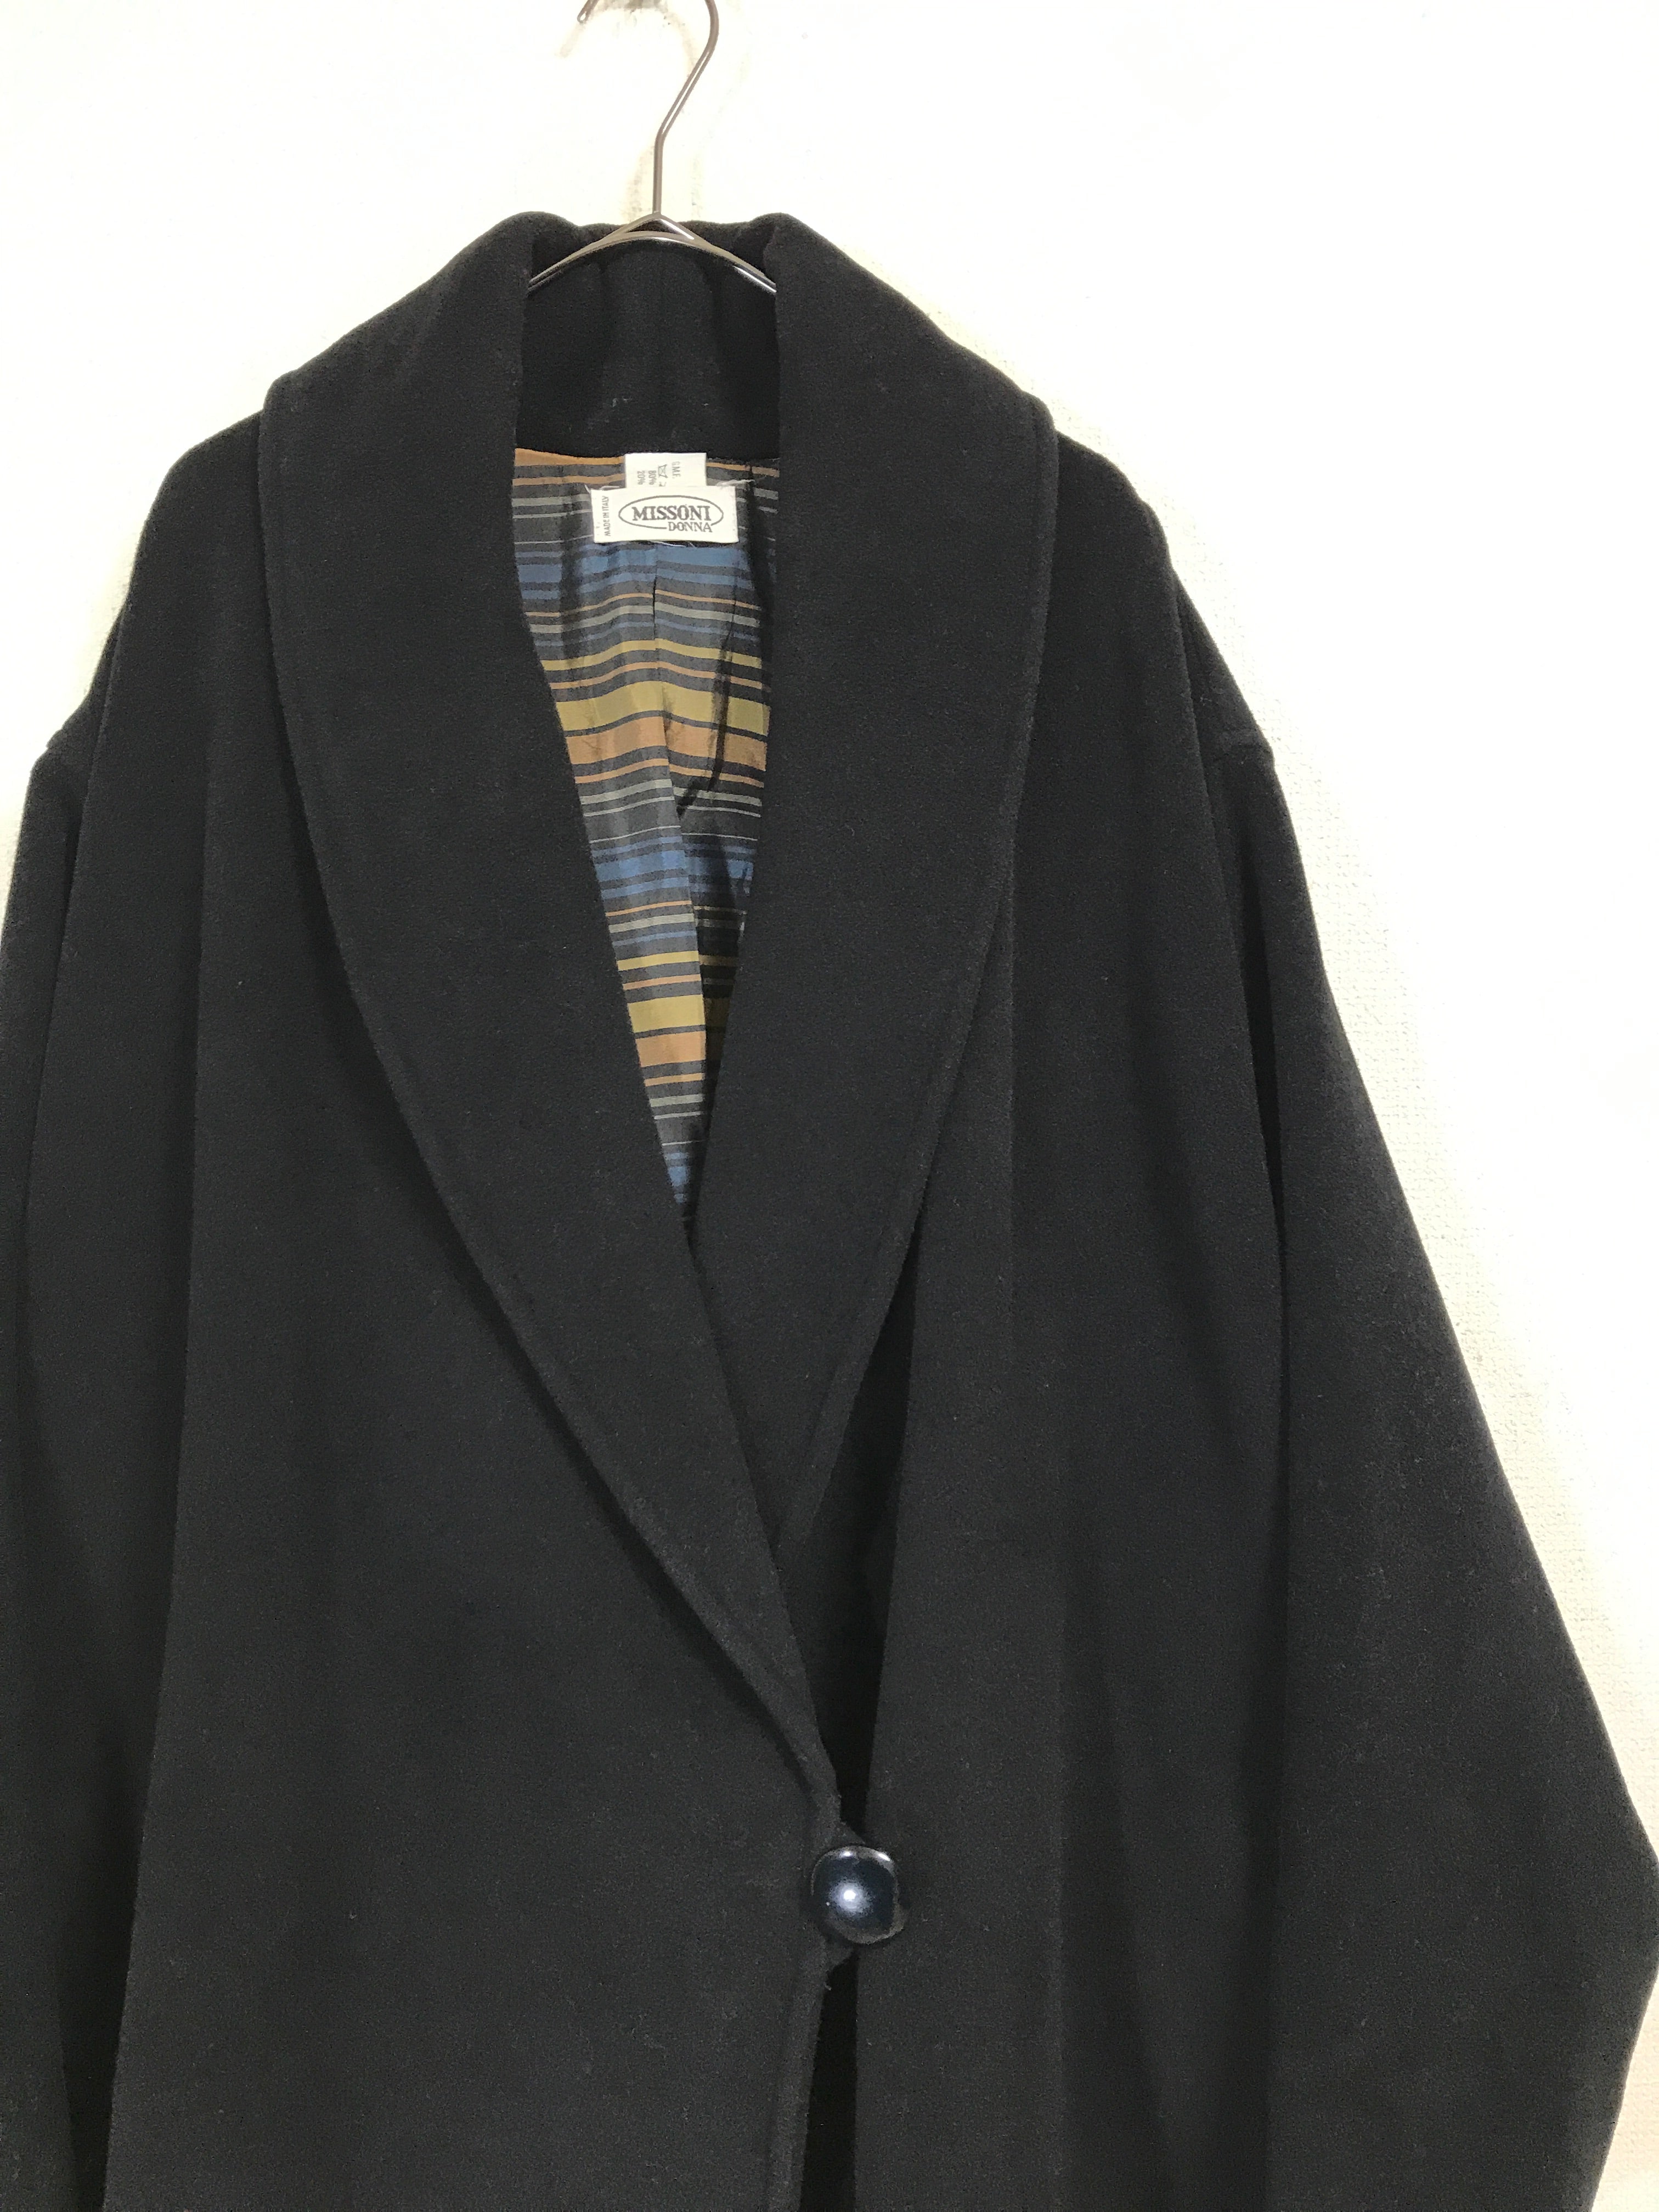 80’s Missoni wool/cashmere double breasted shawl collar coat